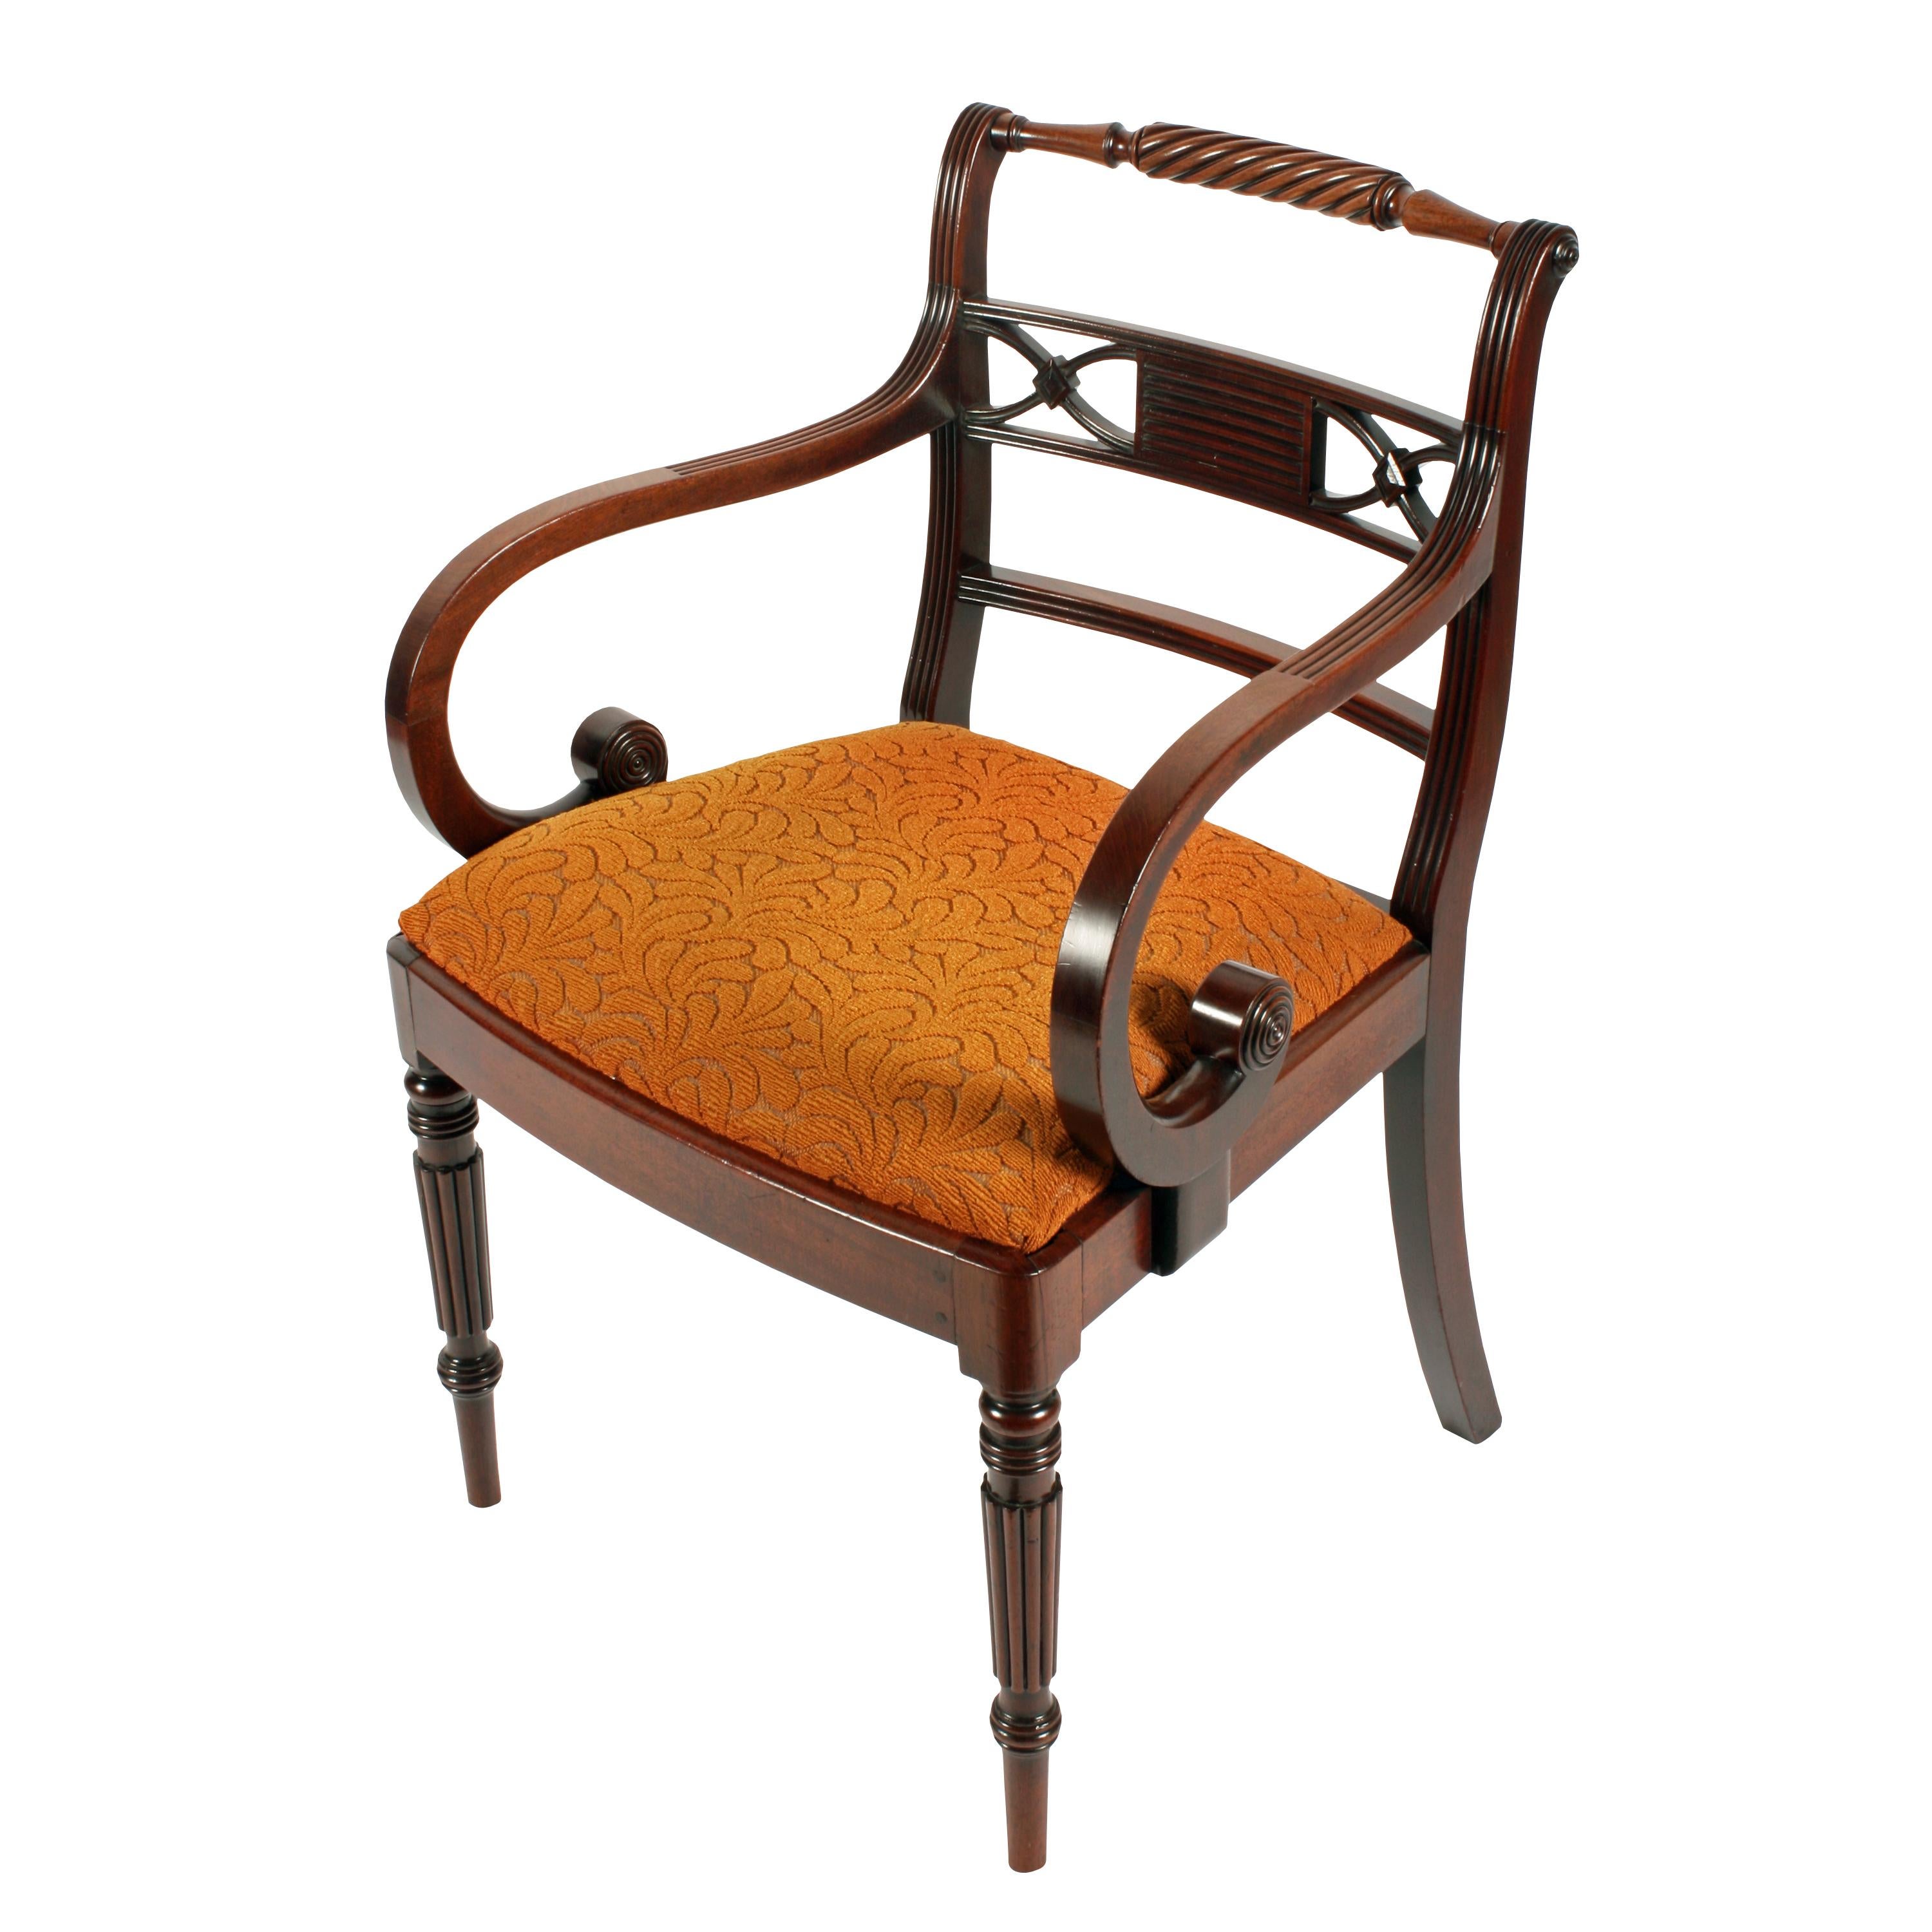 Regency 'Gillows' design elbow chair

 

An early 19th century Regency mahogany elbow or arm chair attributed to Gillows of Lancaster.

The chair back has a rope twist top rail with reed cross rails below and a reeded double 'X' back